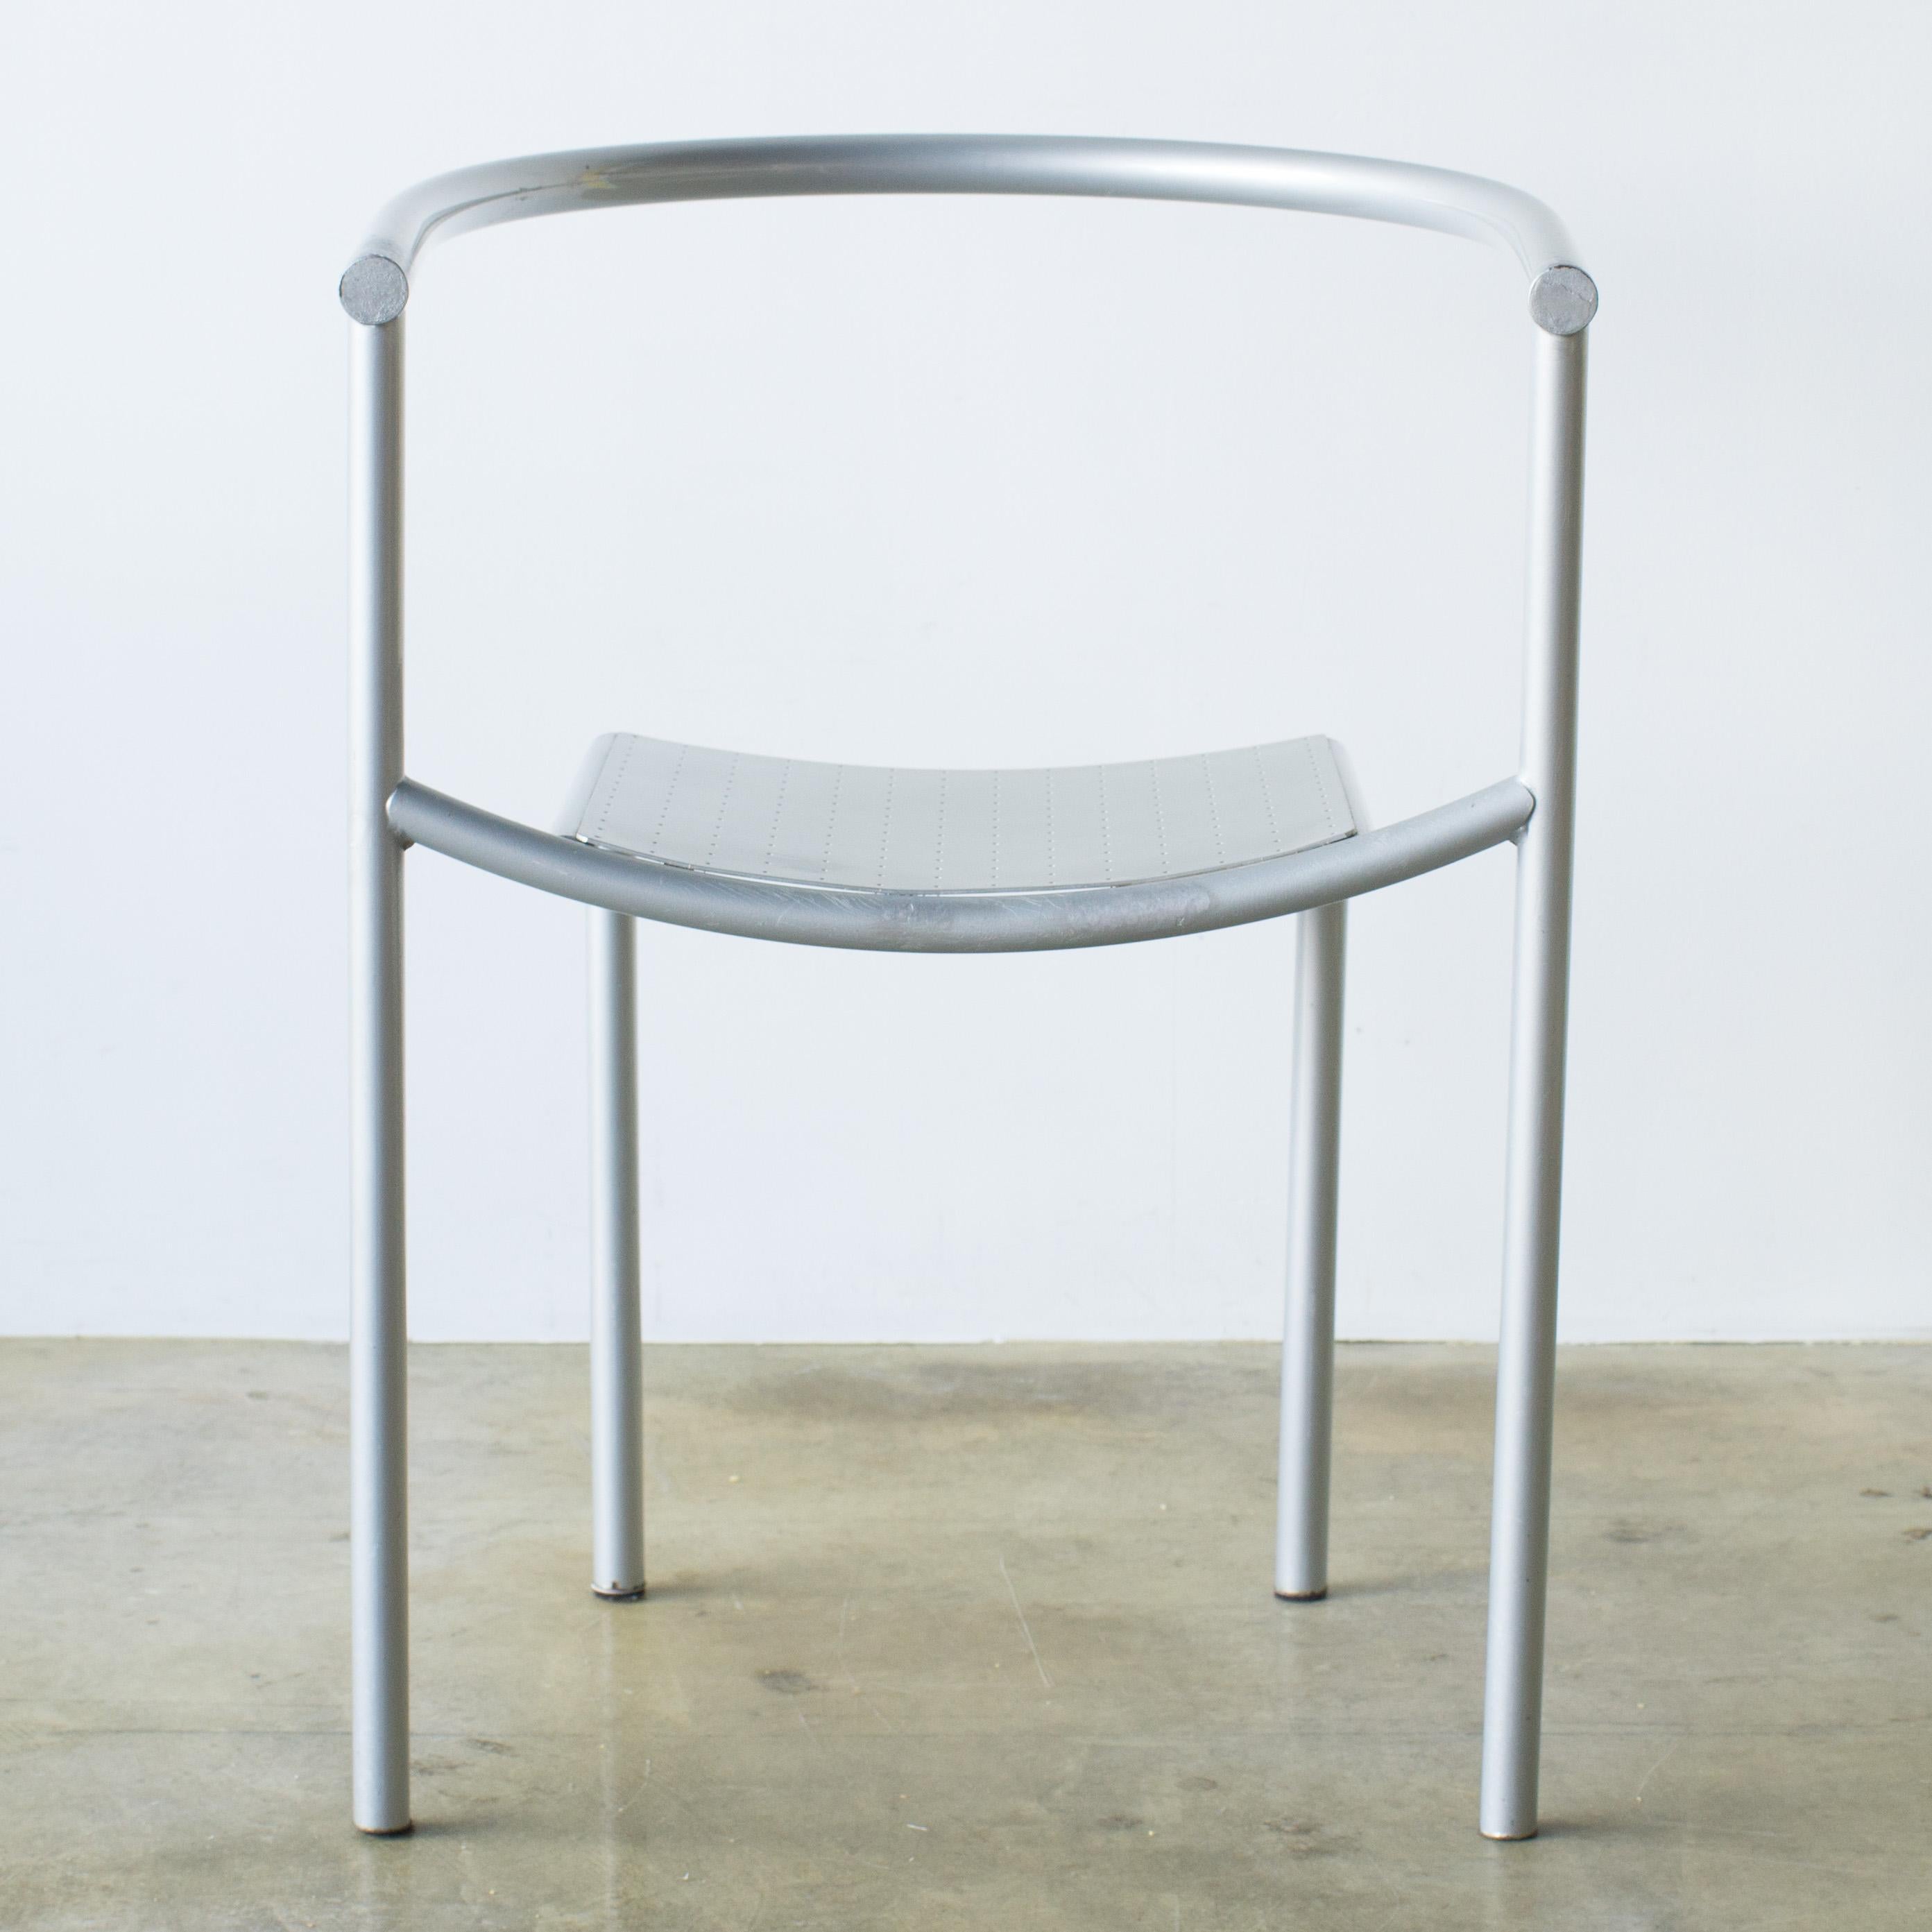 Von vogelsang chair designed by Philippe Starck for Driade.
Collectable piece of 1980s Starck works. Color is gray. Designed in 1985.

 